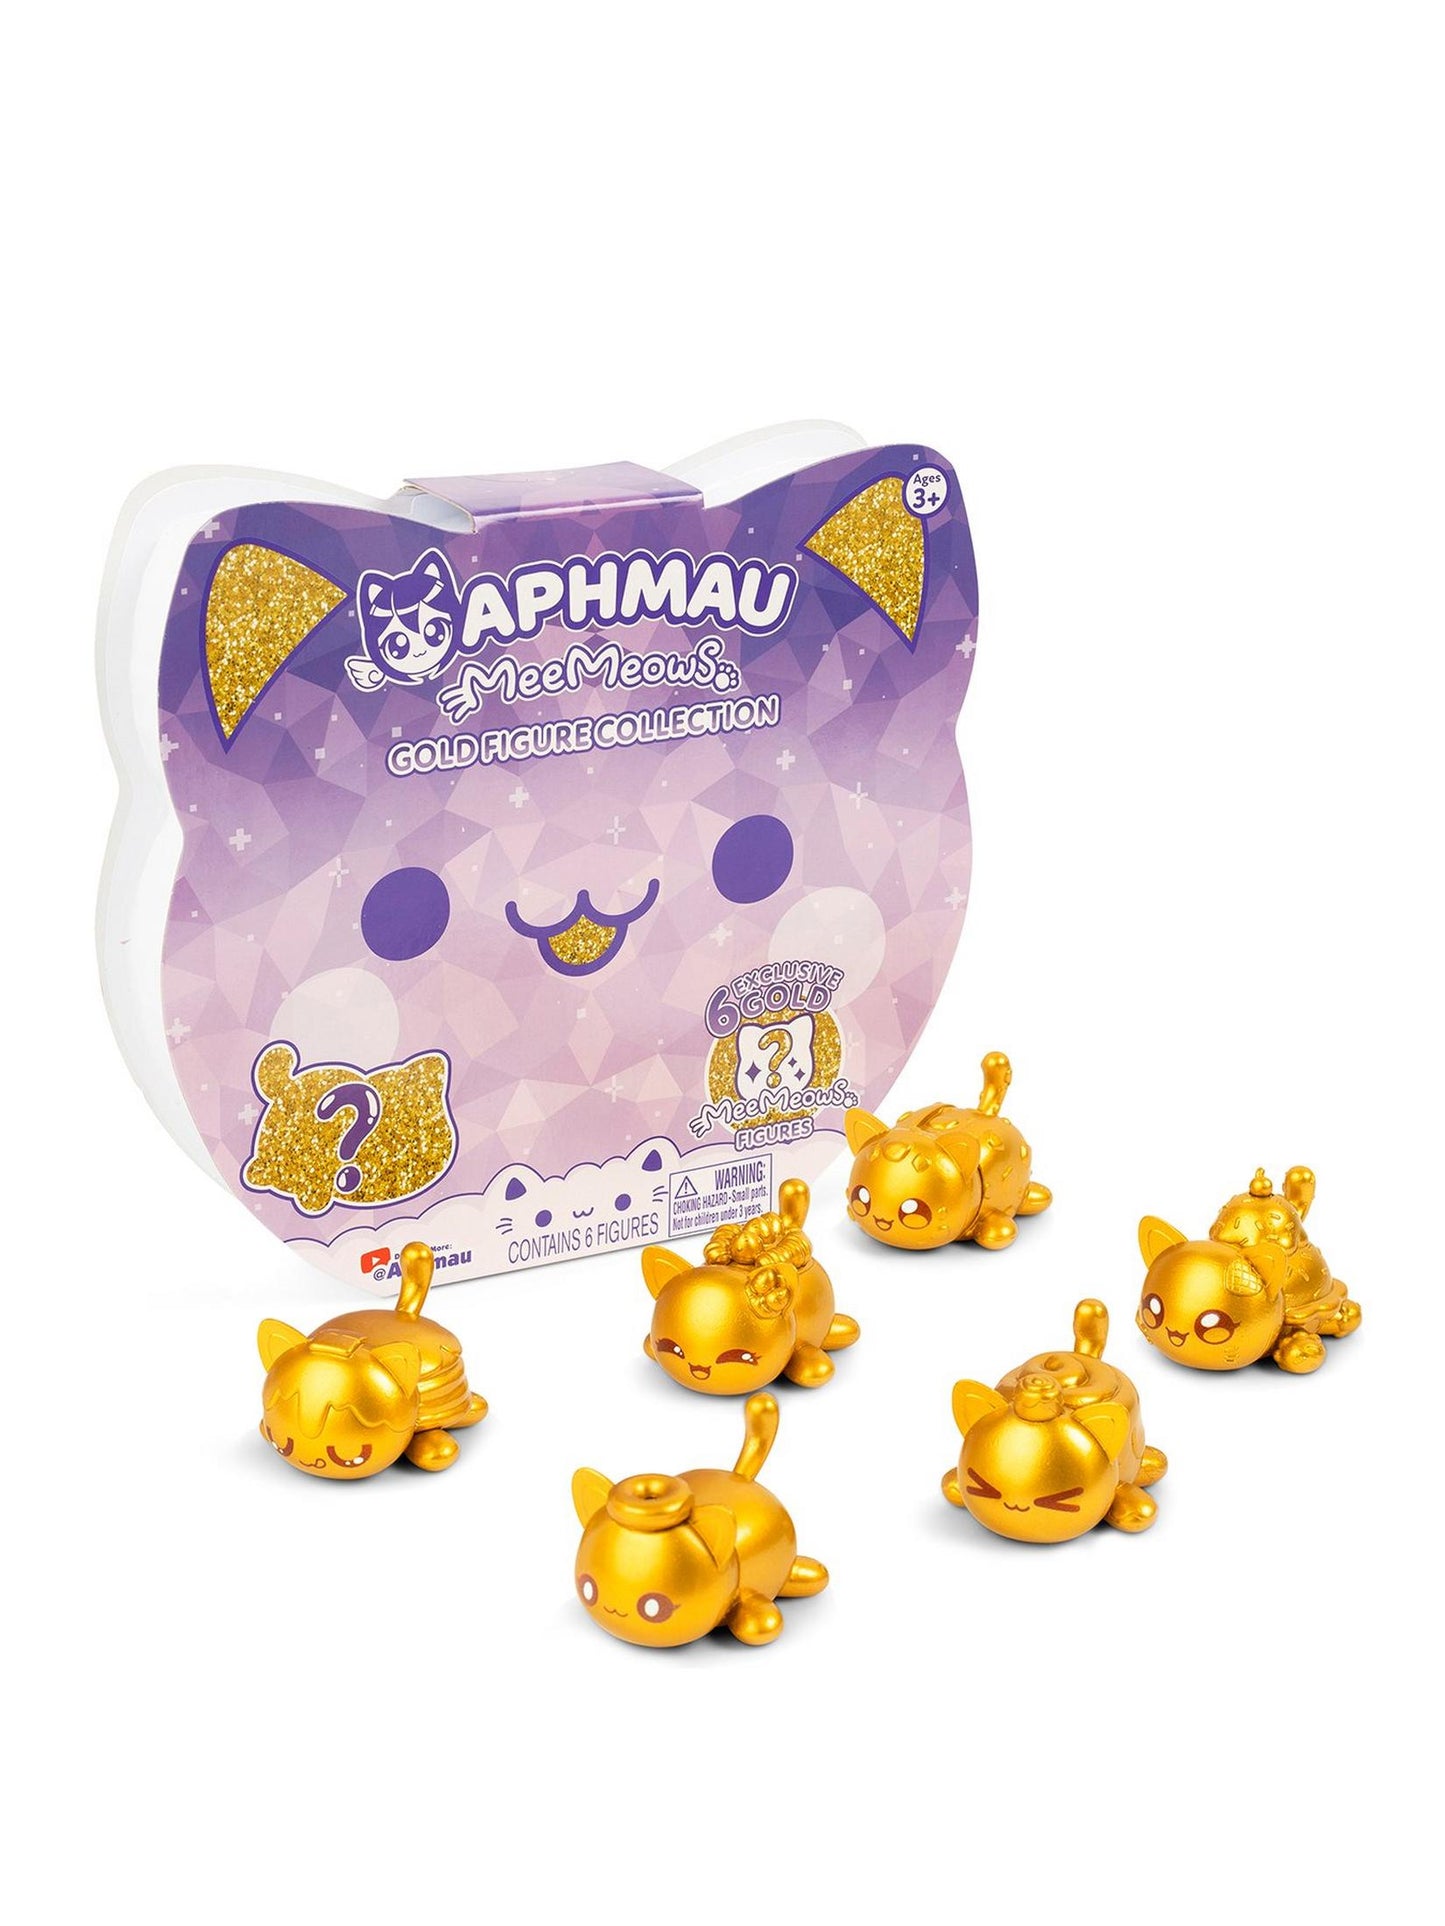 APHMAU - Gold Multipack Mystery Figures